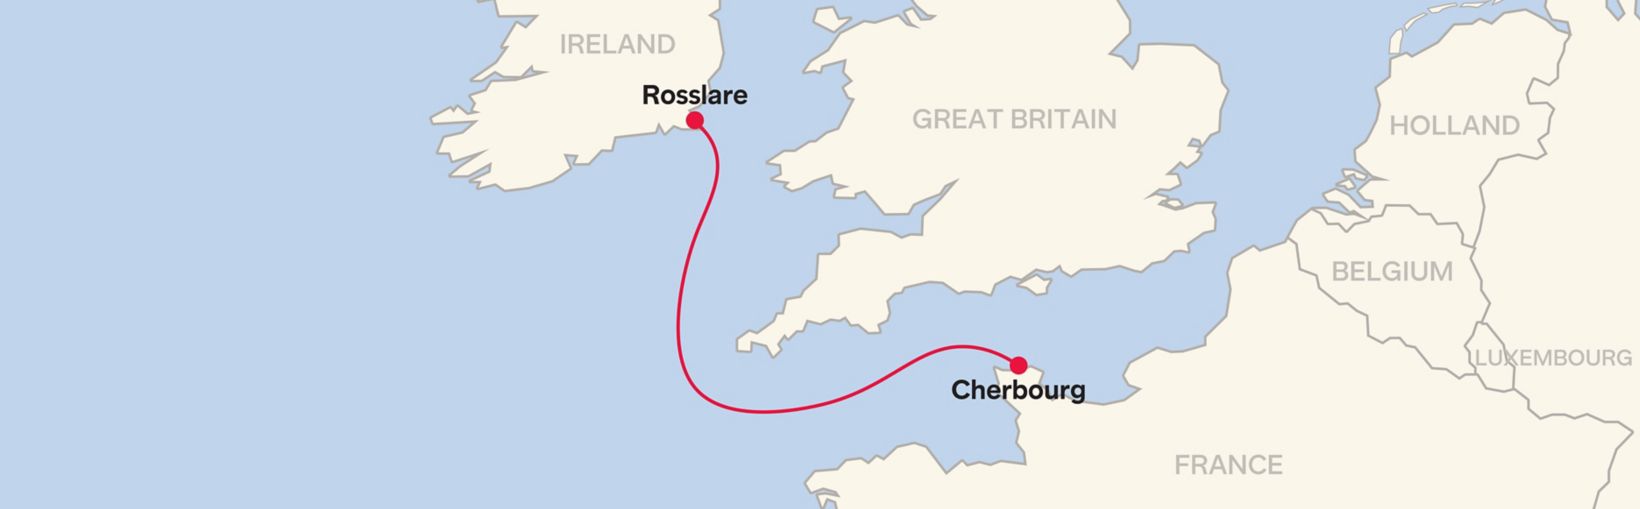 Stena Line Route Map Rosslare - Cherbourg